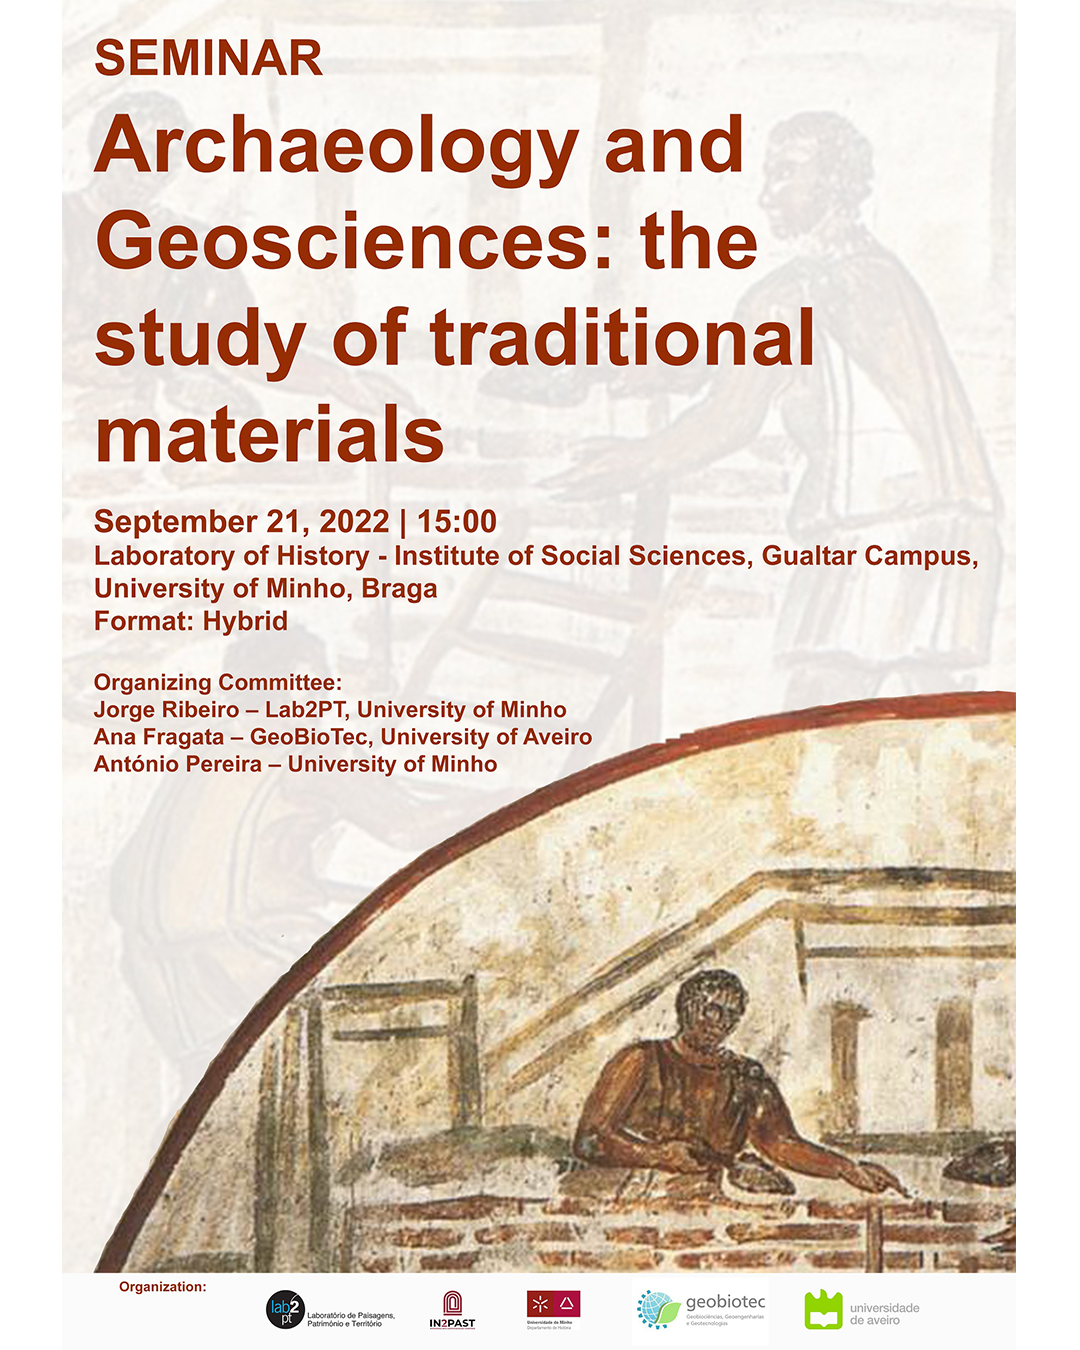 Seminar "Archaeology and Geosciences: the study of traditional materials" image